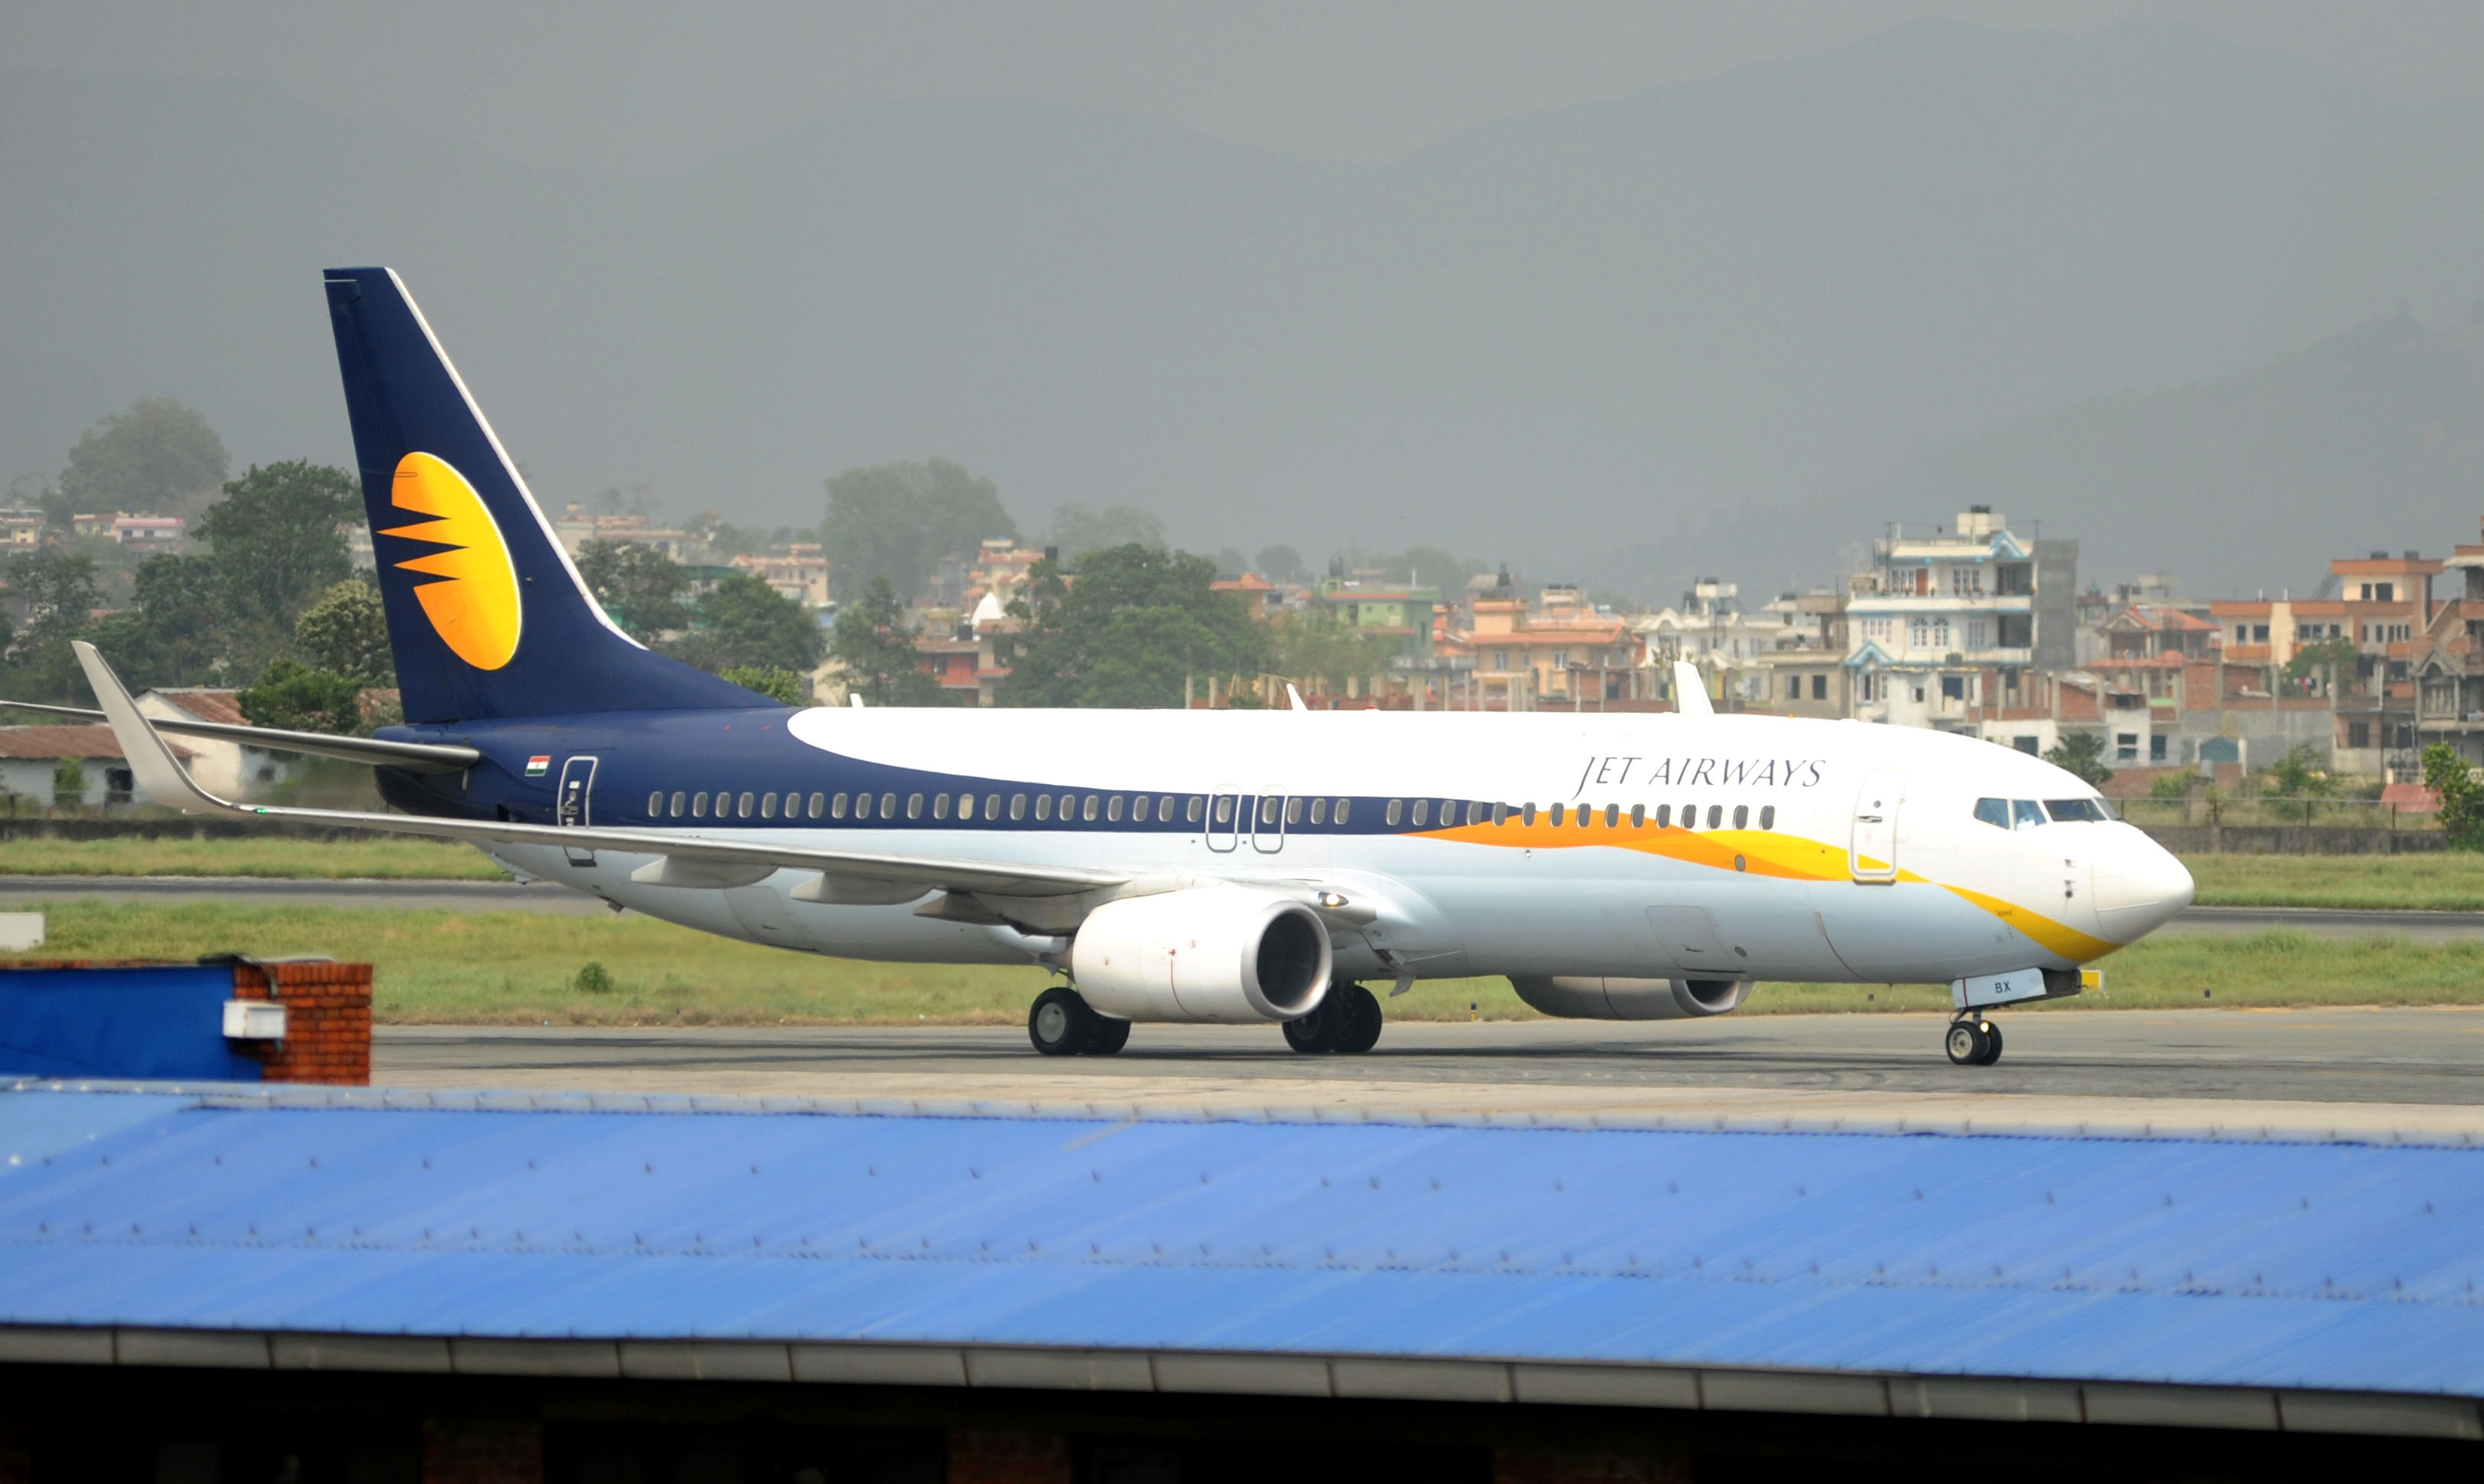 As Jet Airways comes to a halt, airfares for New Delhi take off